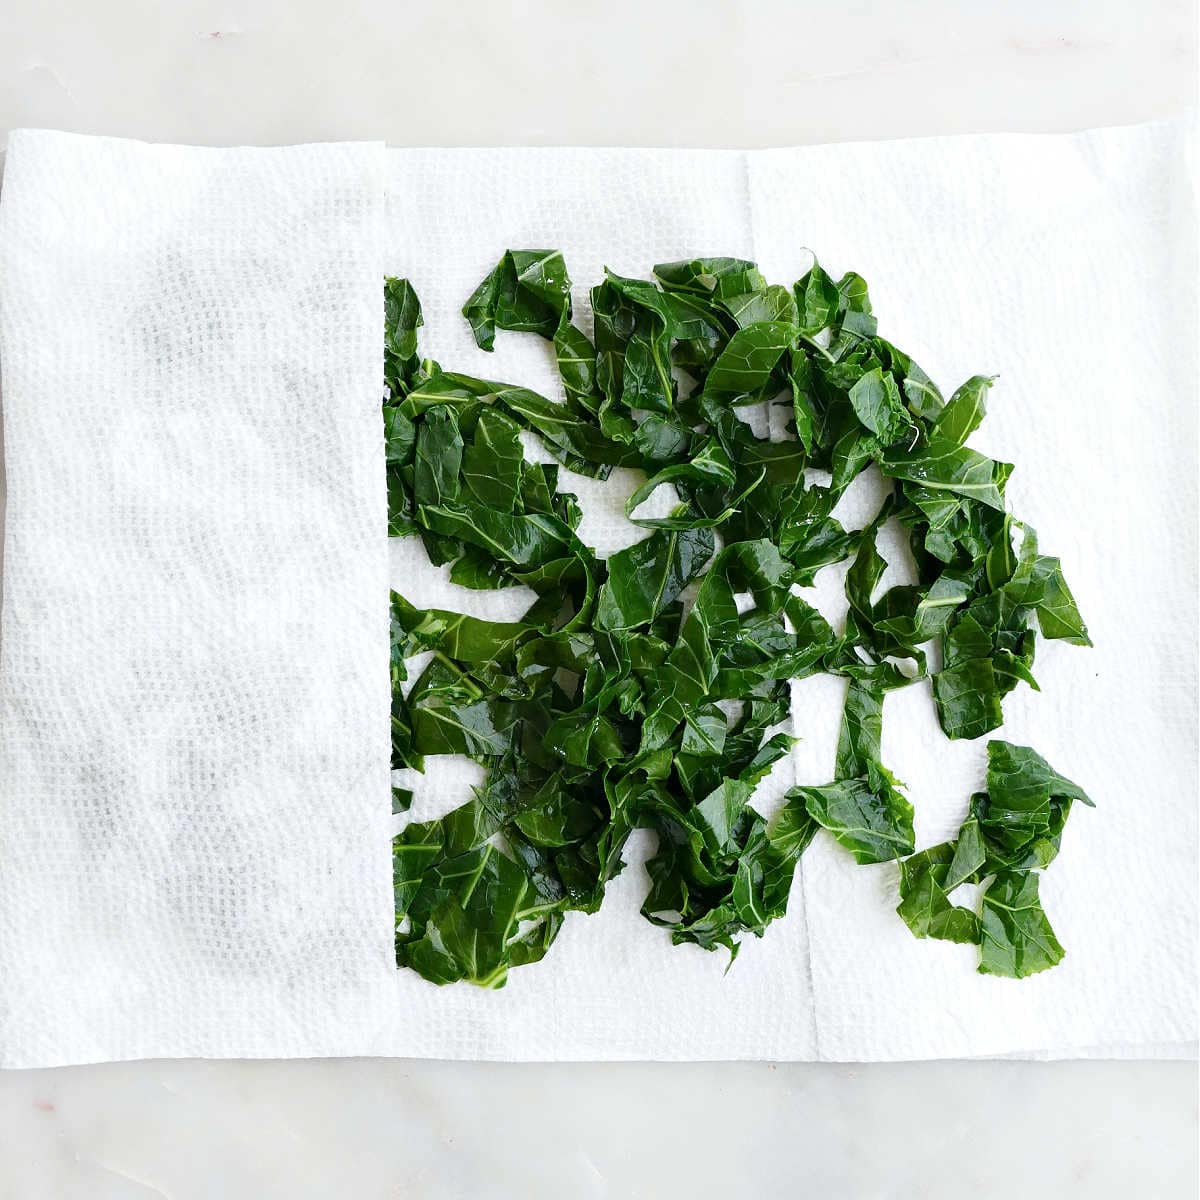 blanched collard greens being dried with paper towels on a counter